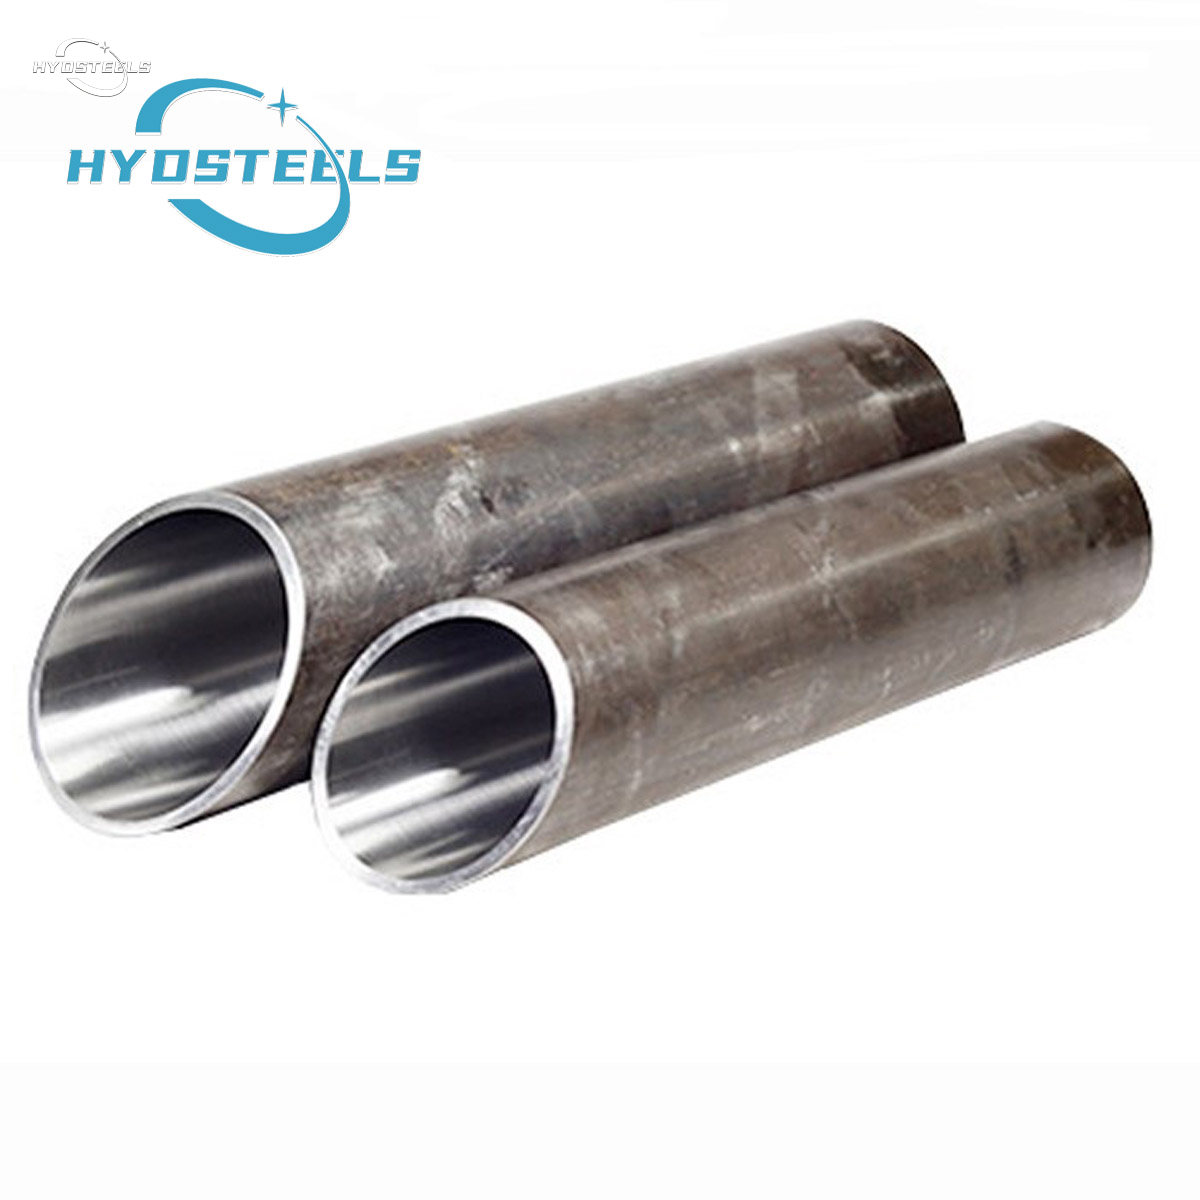 China E355/St52 Cold Drawn Seamless Steel Tube for Honed Hydraulic Cylinder Pipes